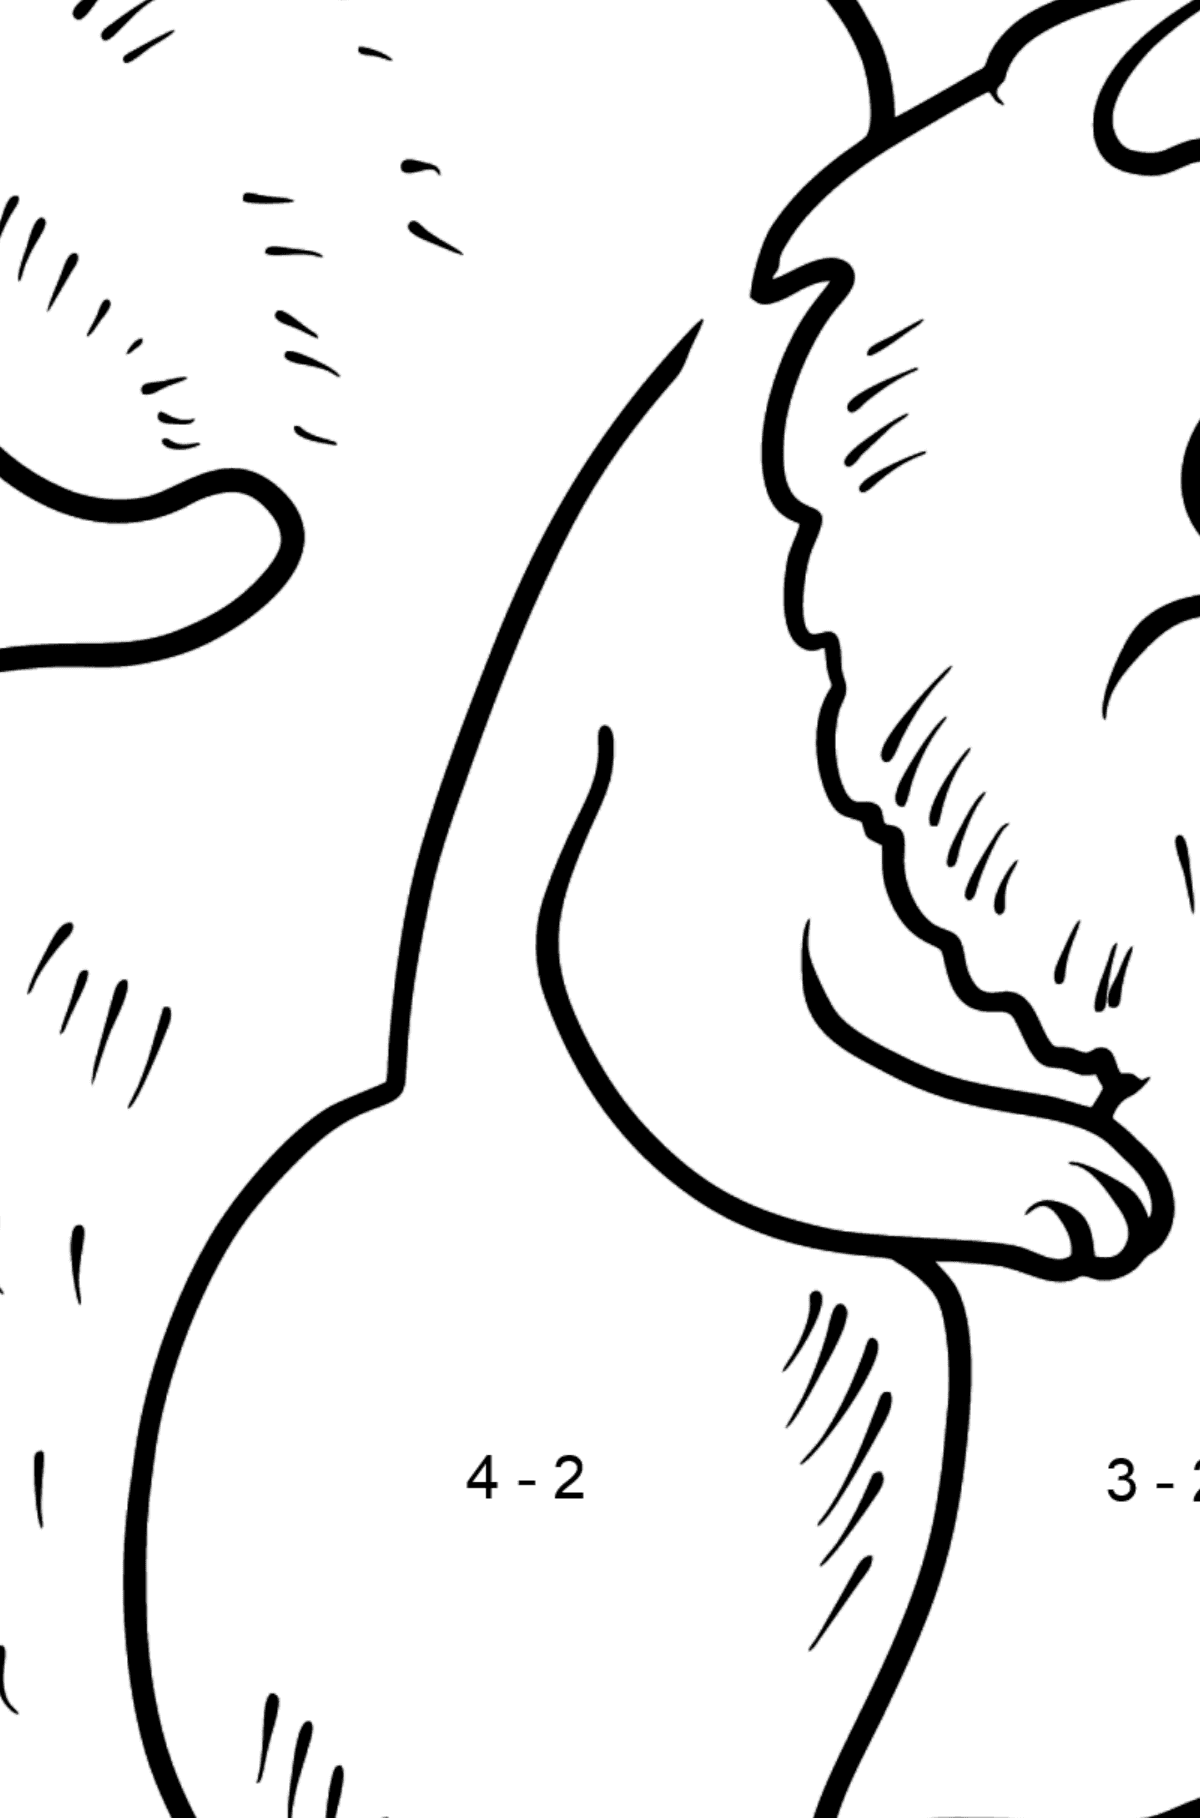 Squirrel coloring page - Math Coloring - Subtraction for Kids